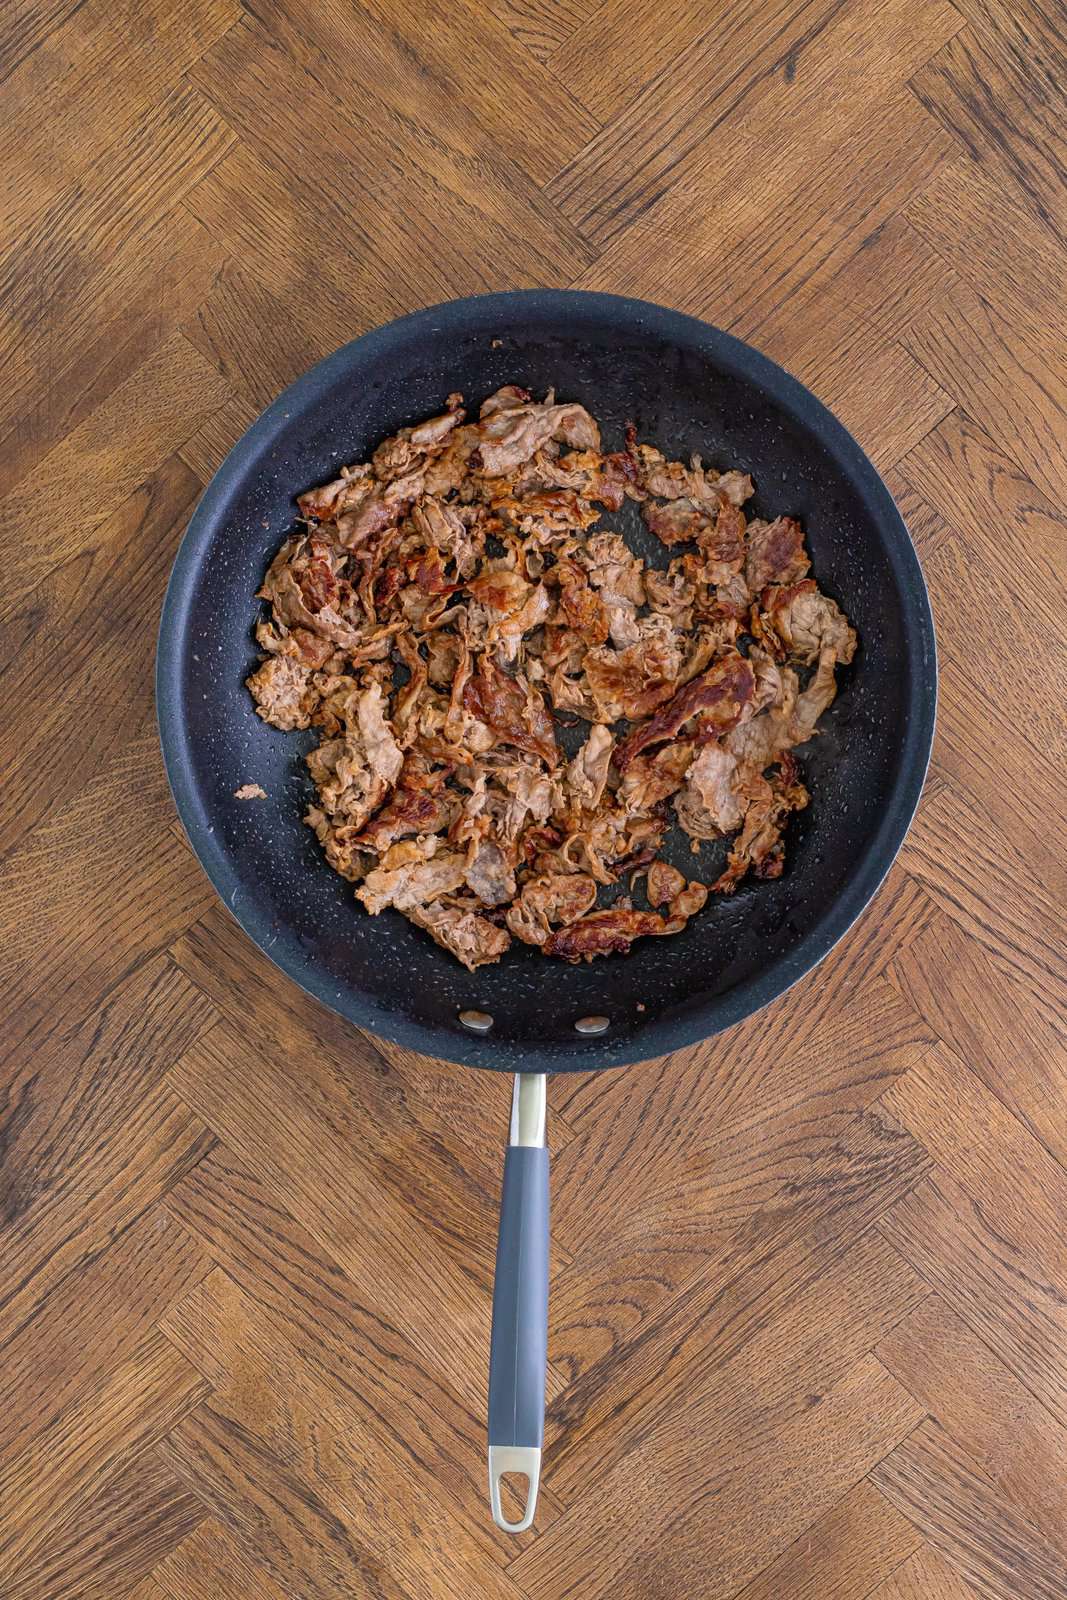 Cooked shaved steak in a skillet. 